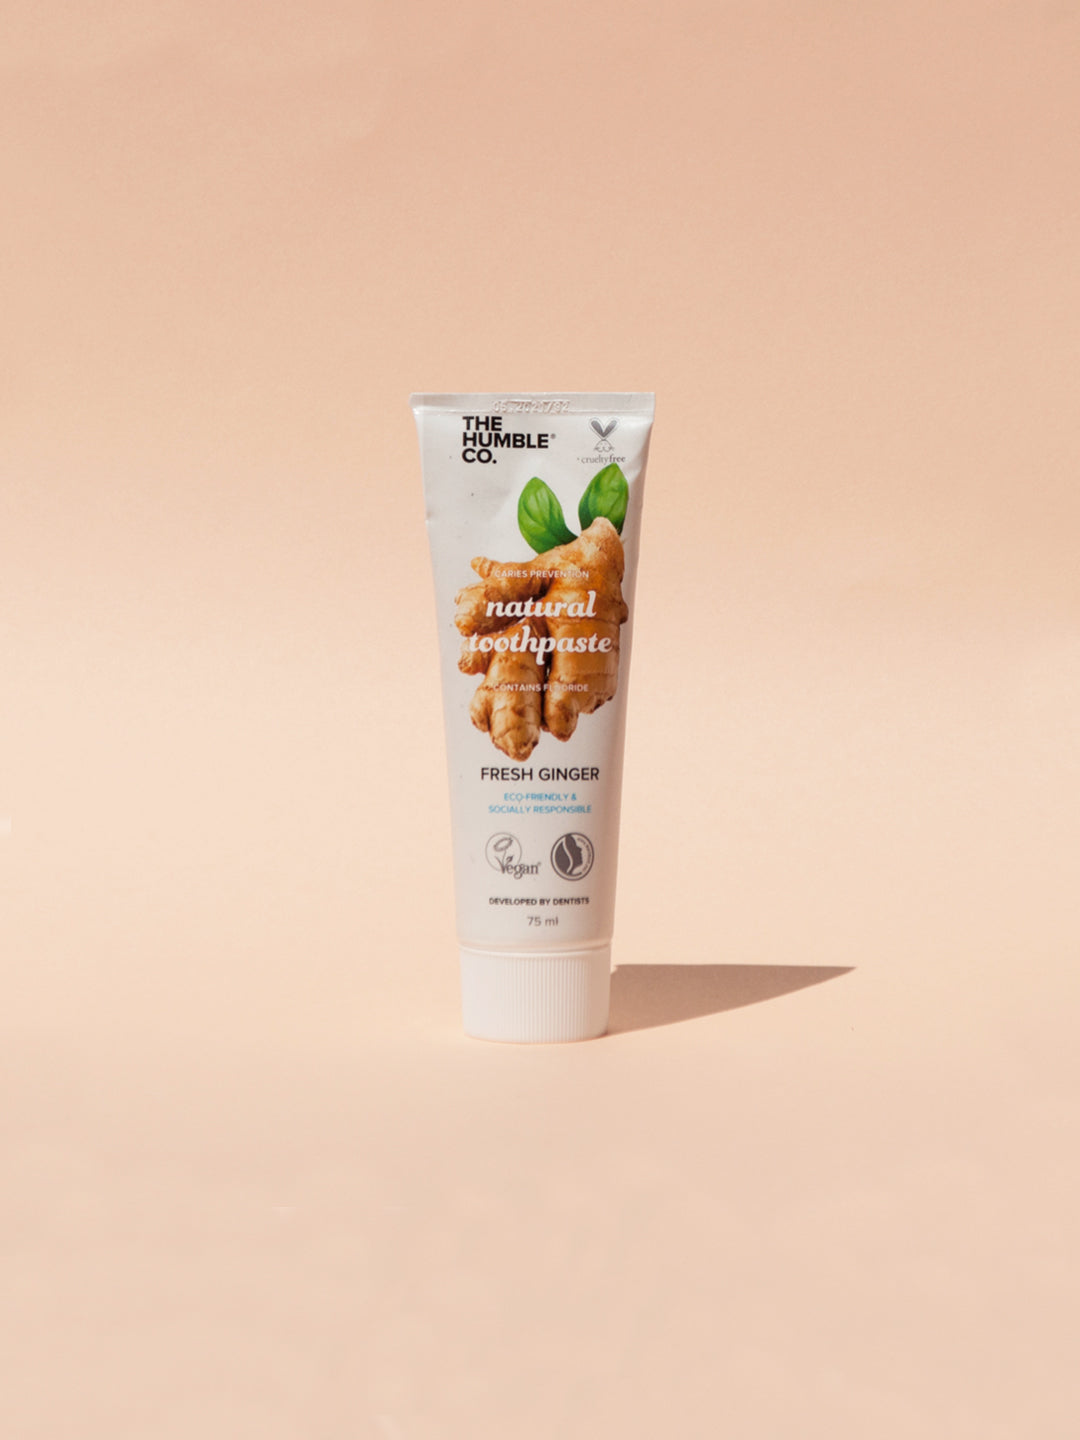 Kauchy_The_Humble_Co_Natural_toothpaste_Ginger